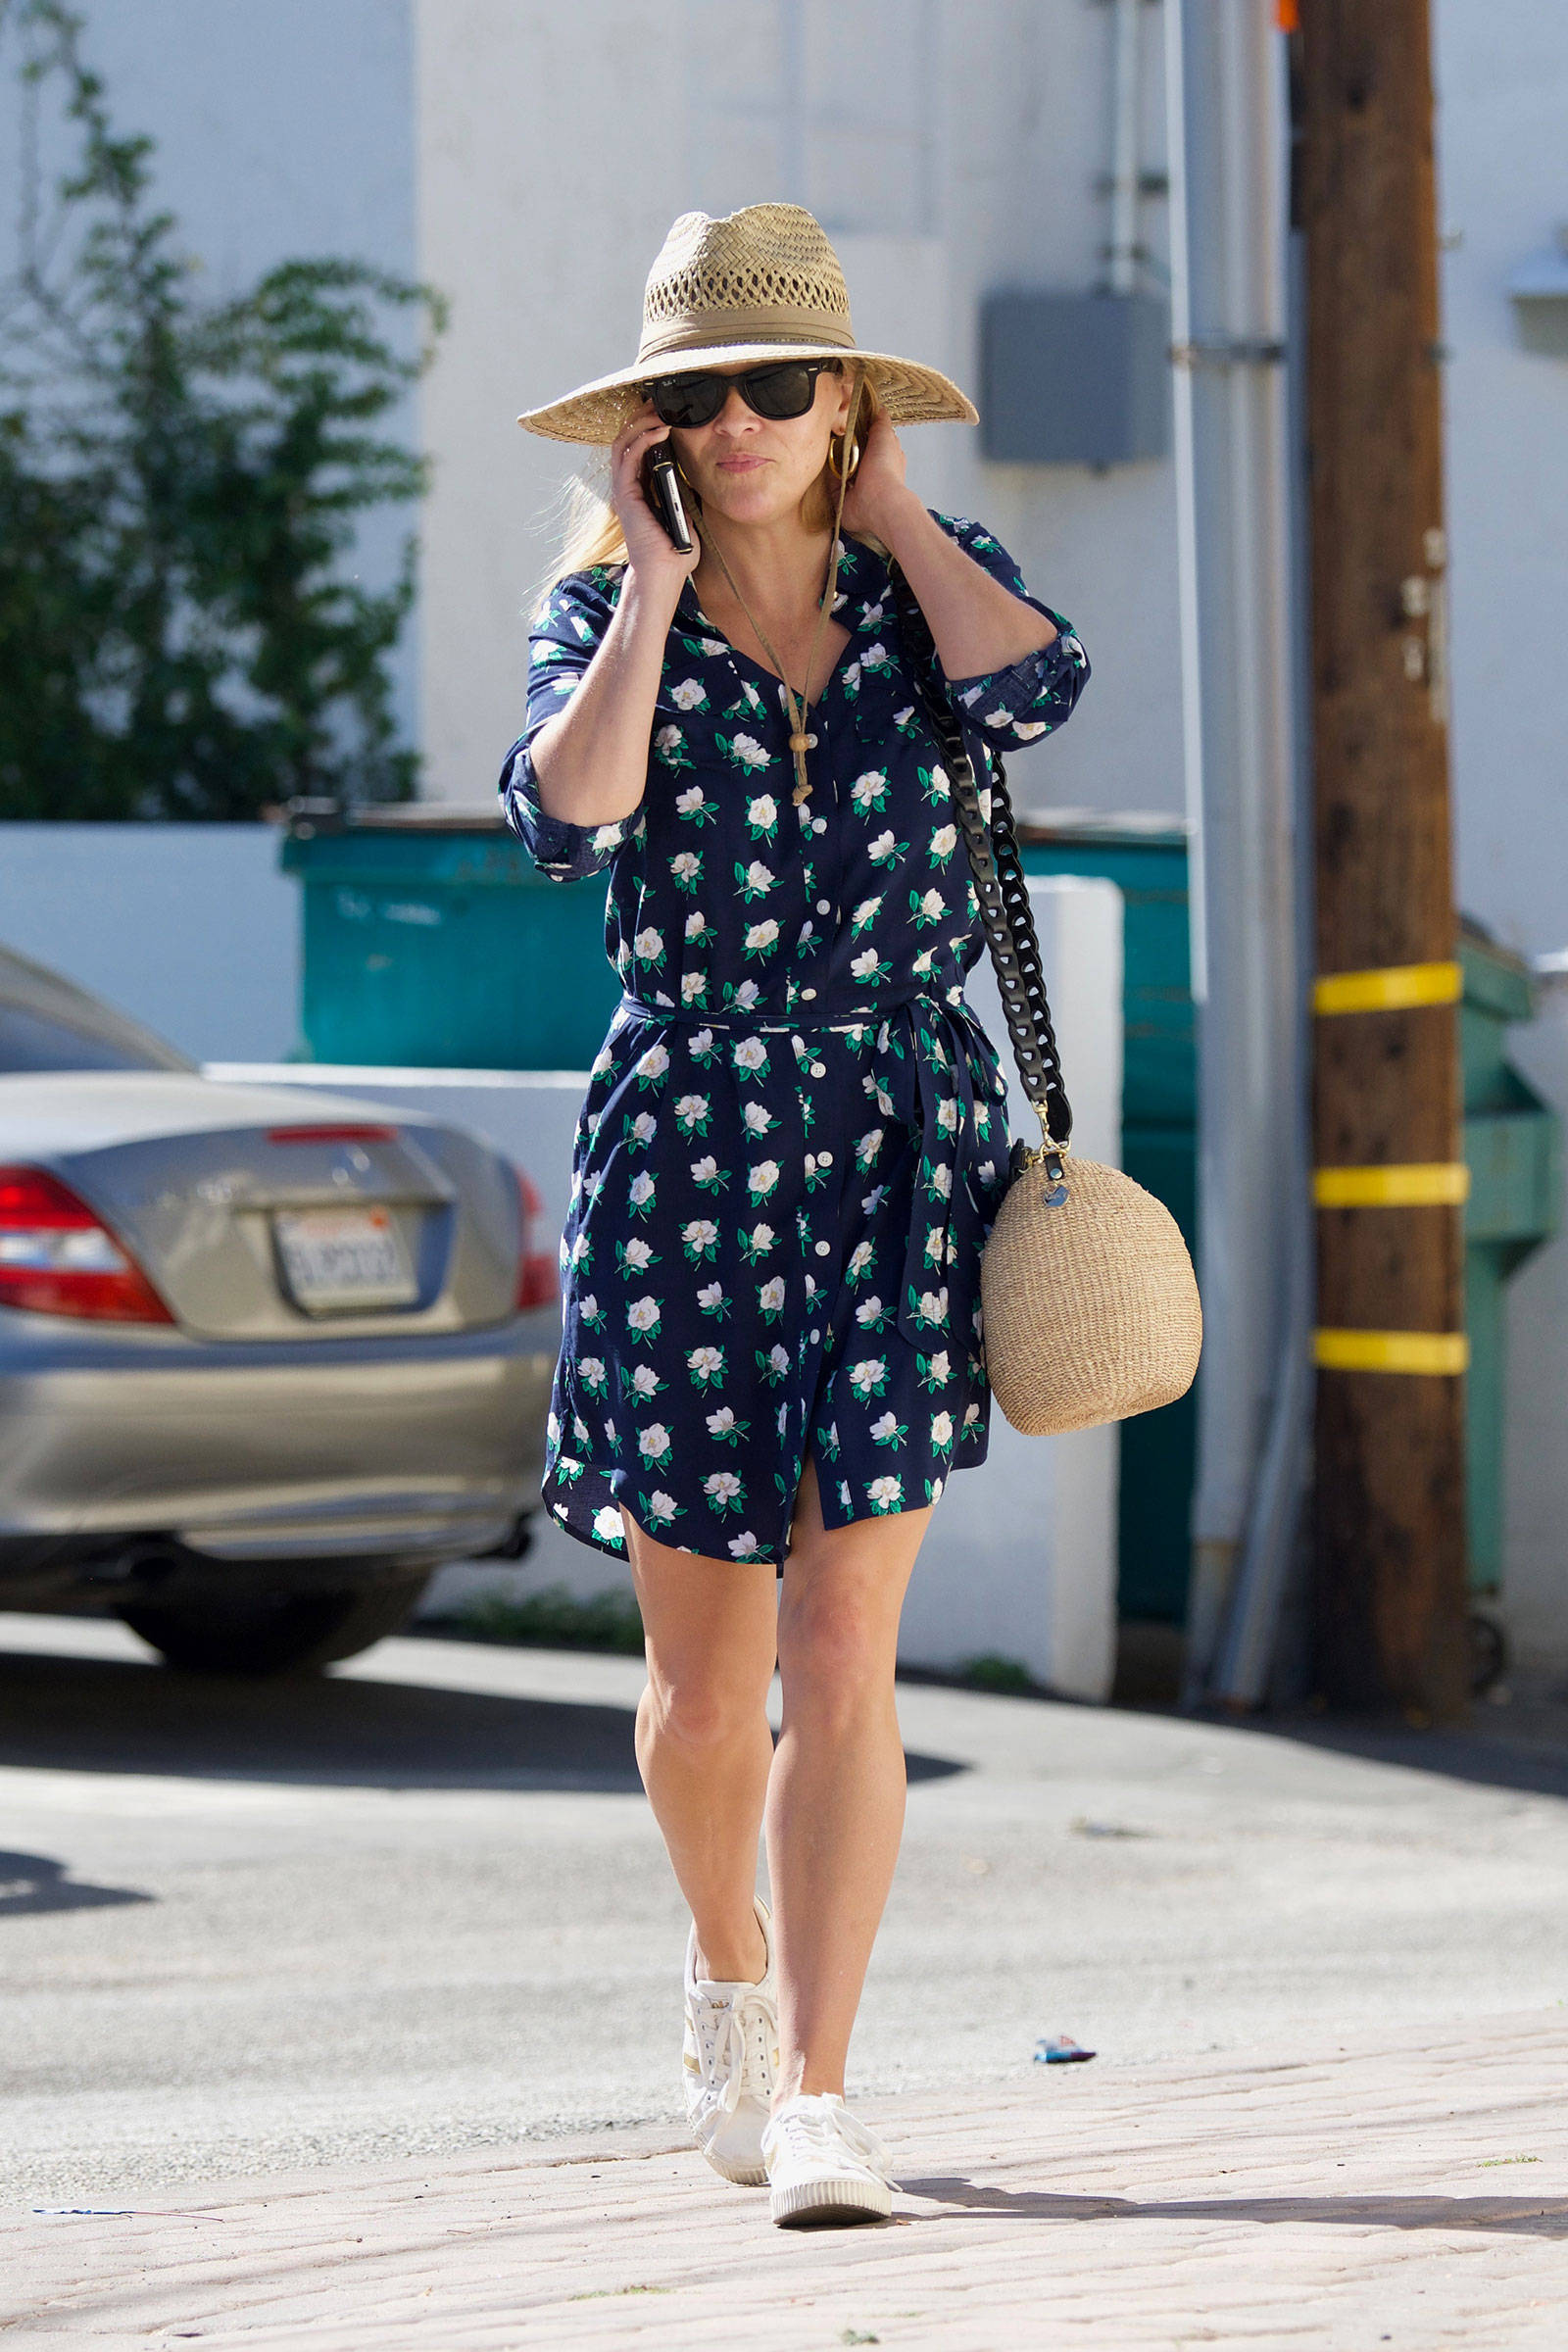 Steal Her Style: Reese Witherspoon's floral dress and white sneakers outfit for summer